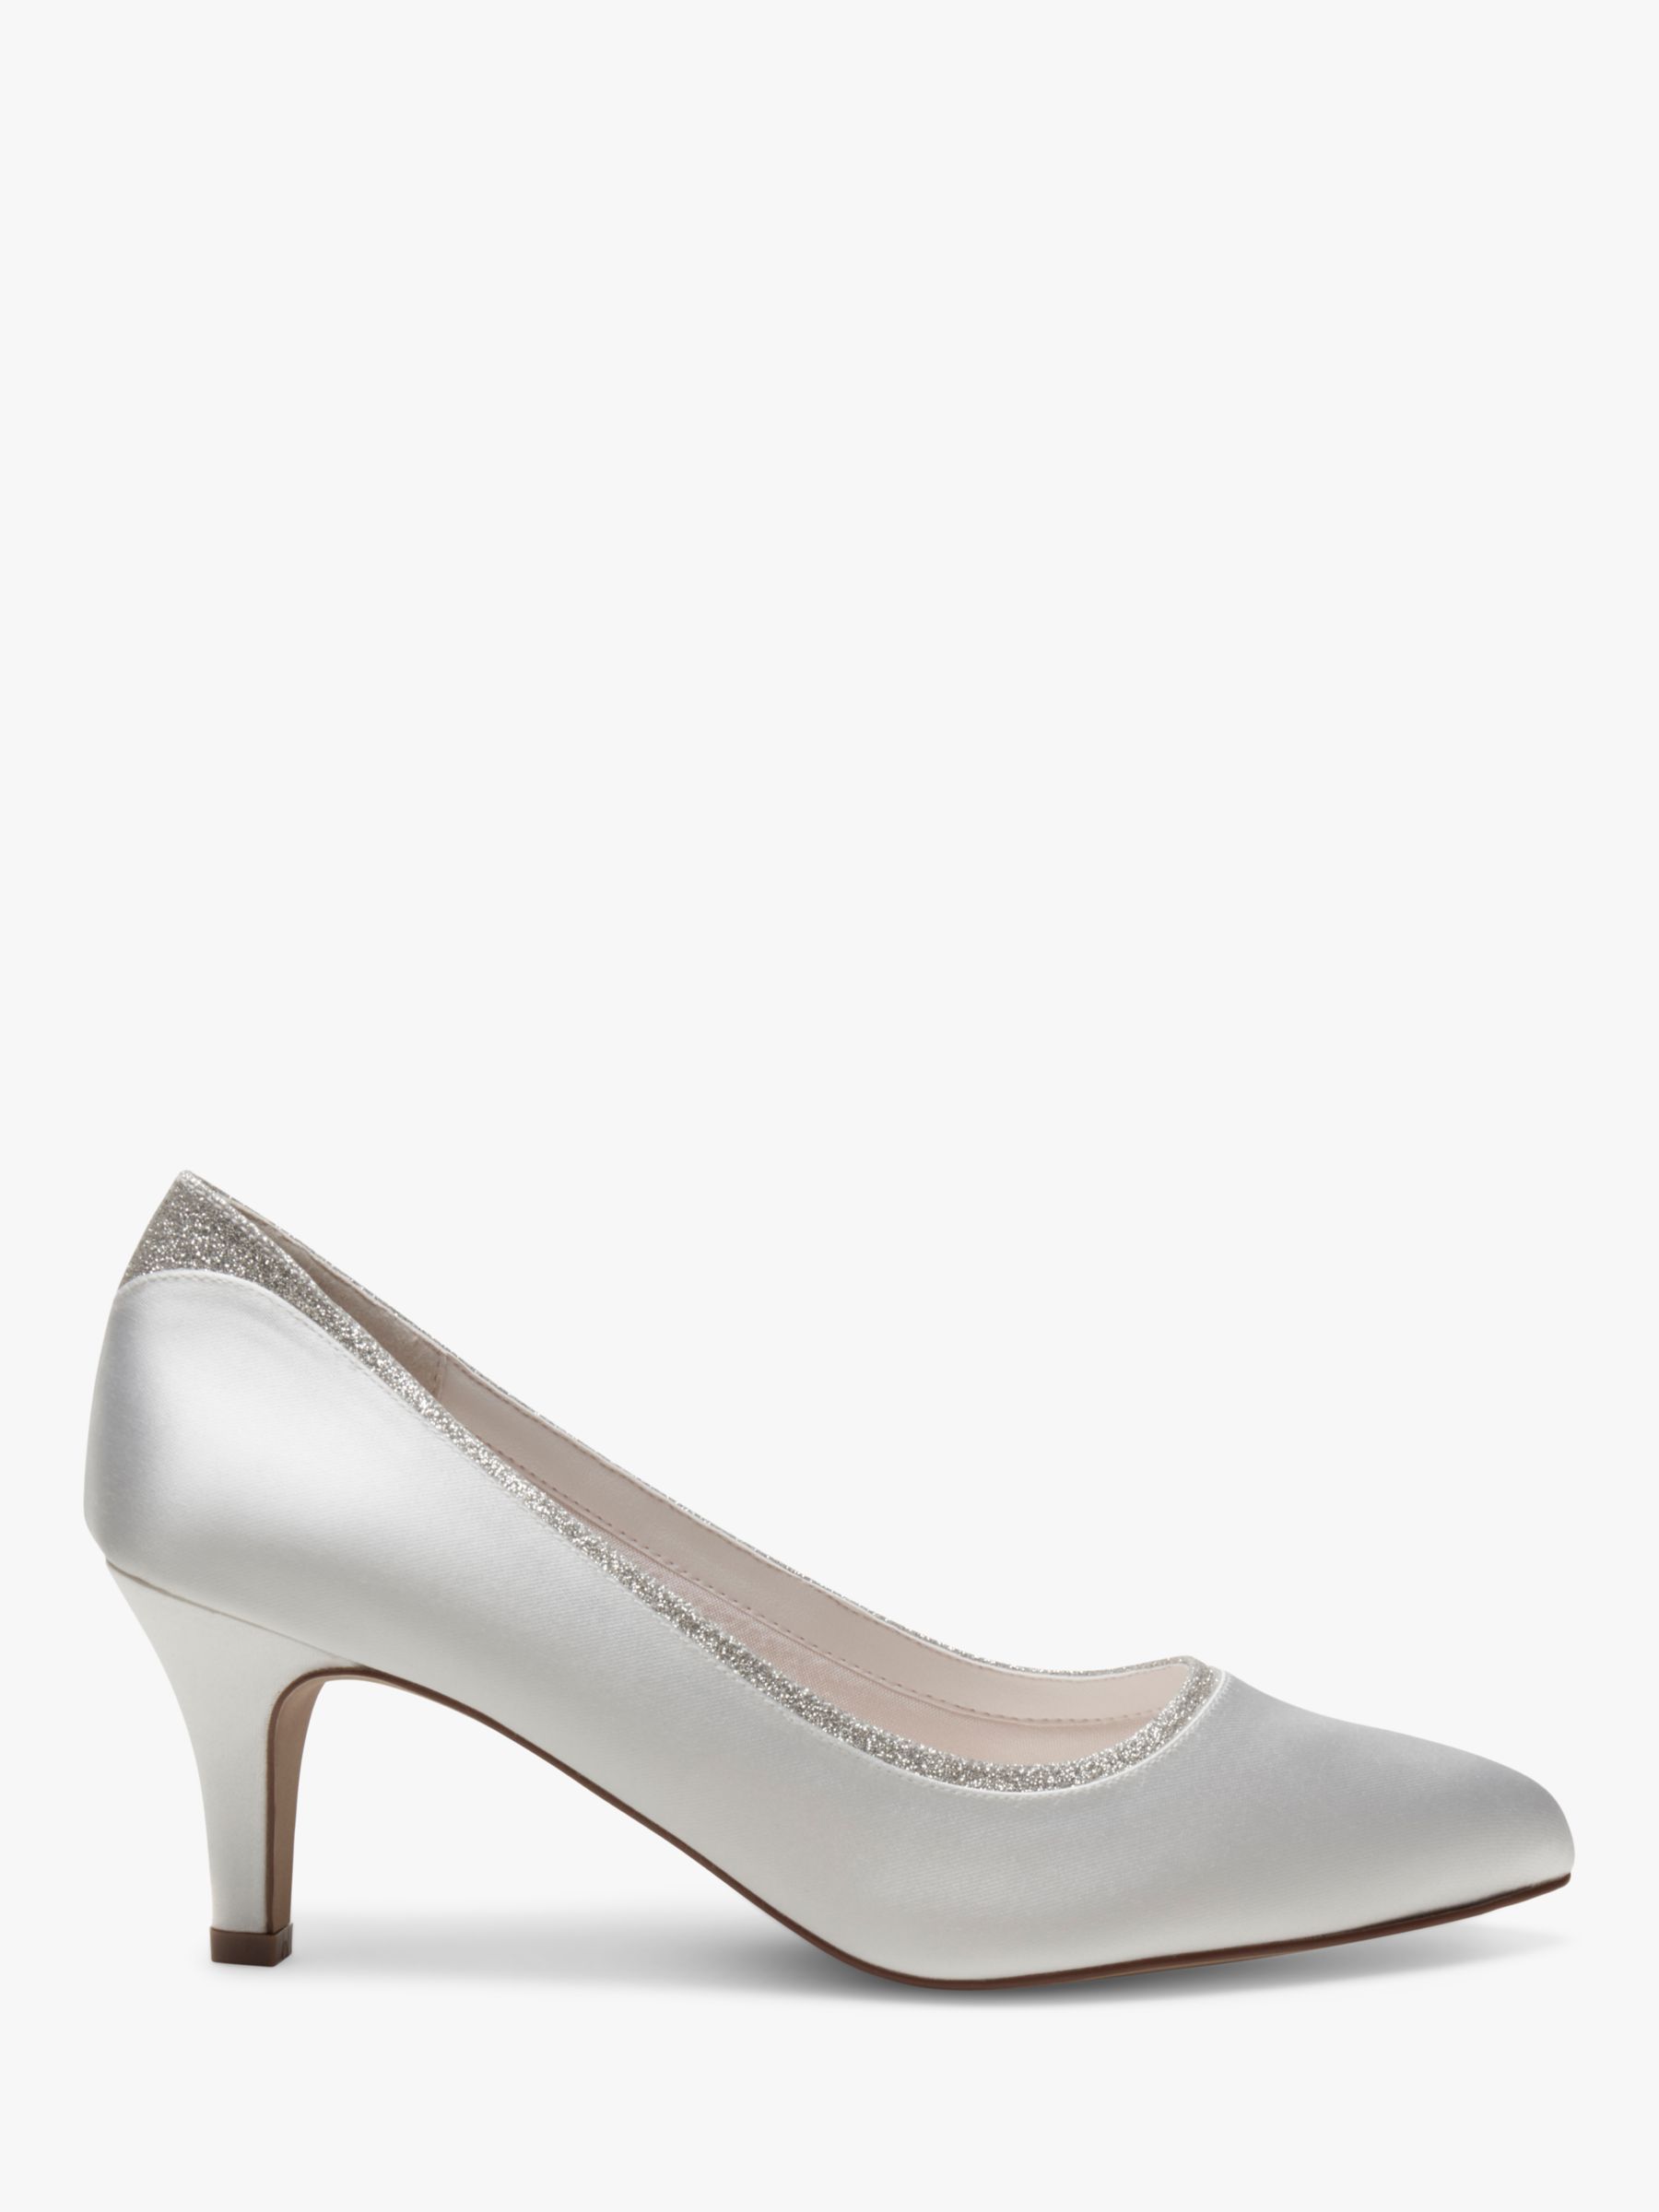 Rainbow Club Jara Extra Wide Fit Satin Court Shoes, Ivory at John Lewis ...